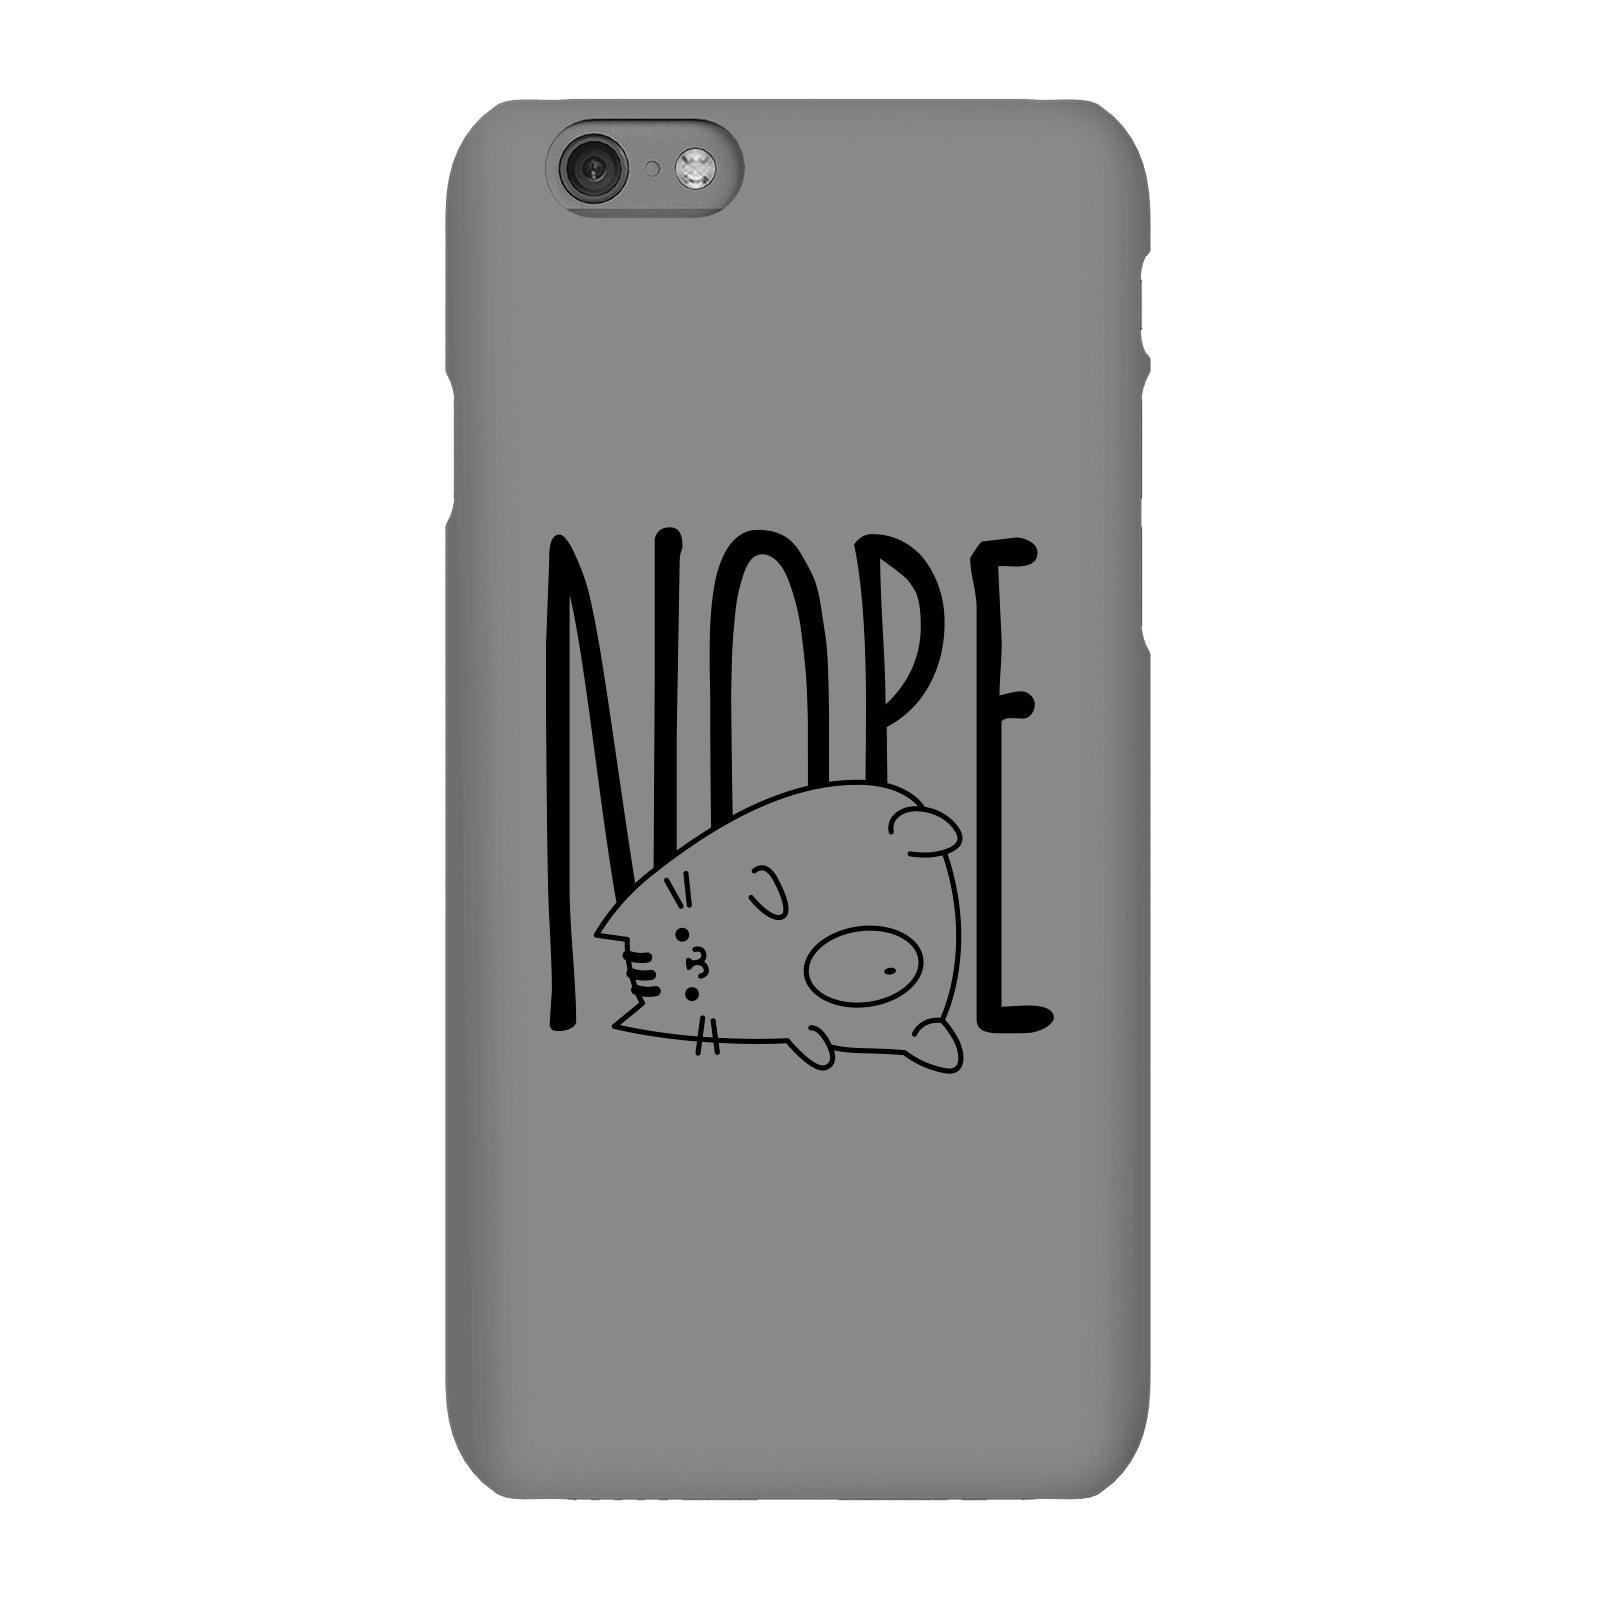 Nope Phone Case for iPhone and Android - iPhone 6S - Snap Case - Matte